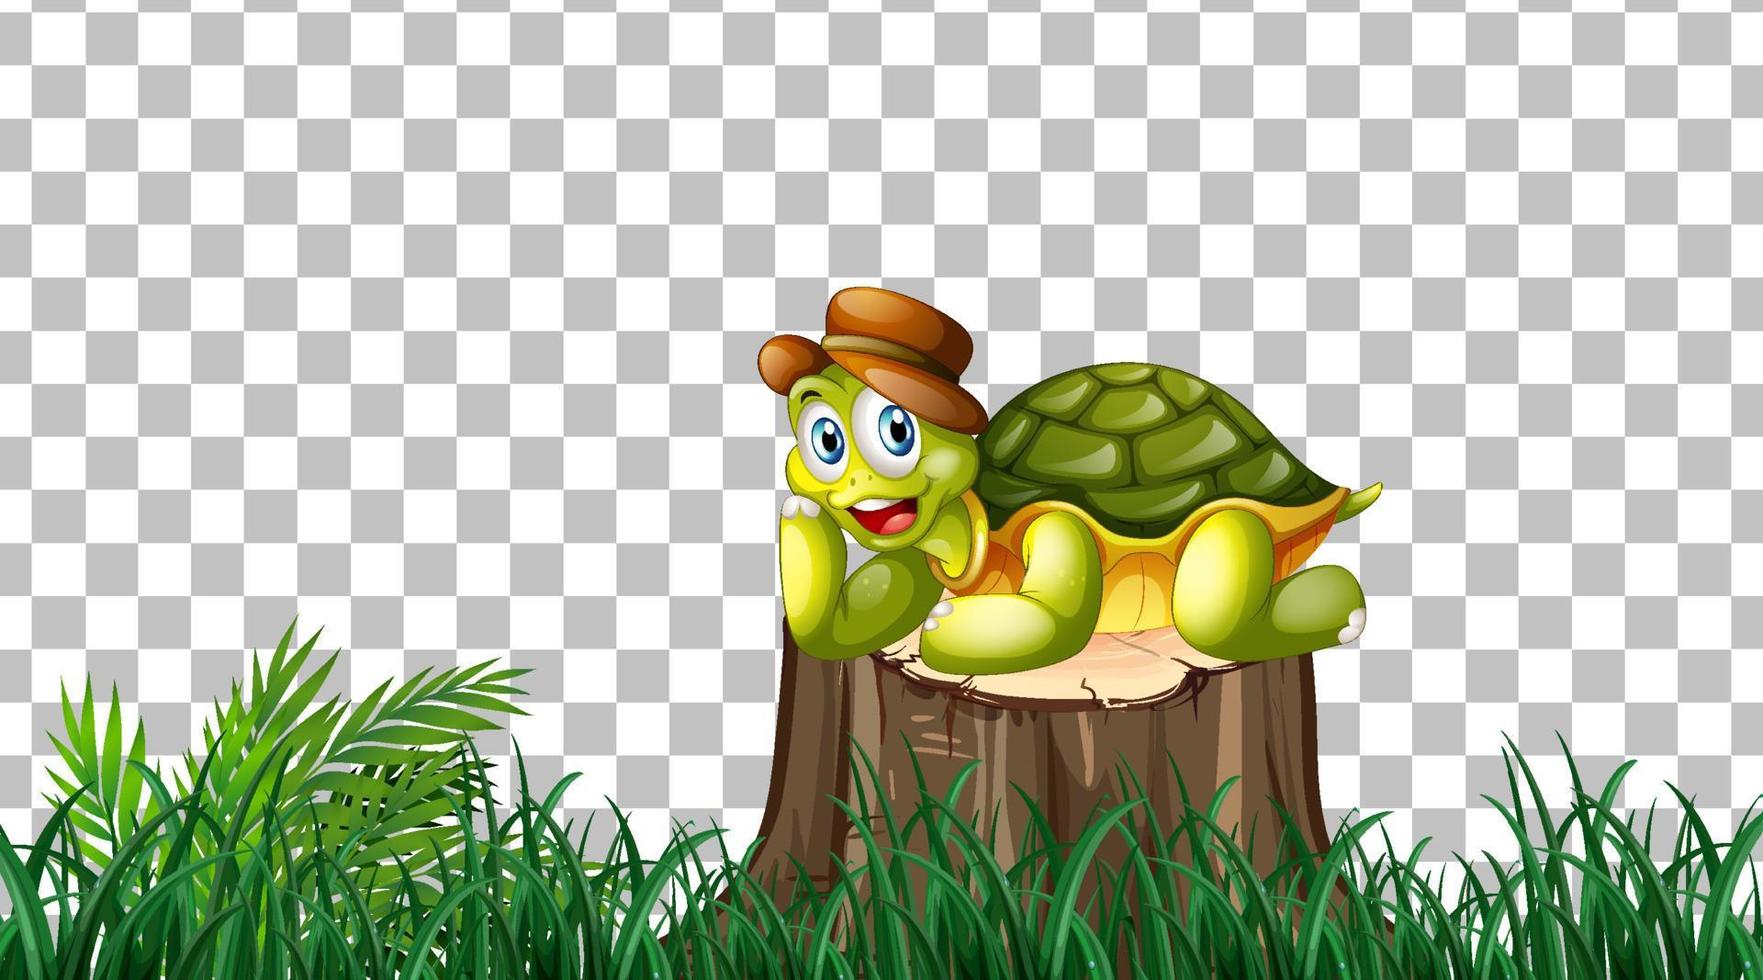 Turtle on the grass field on grid background vector